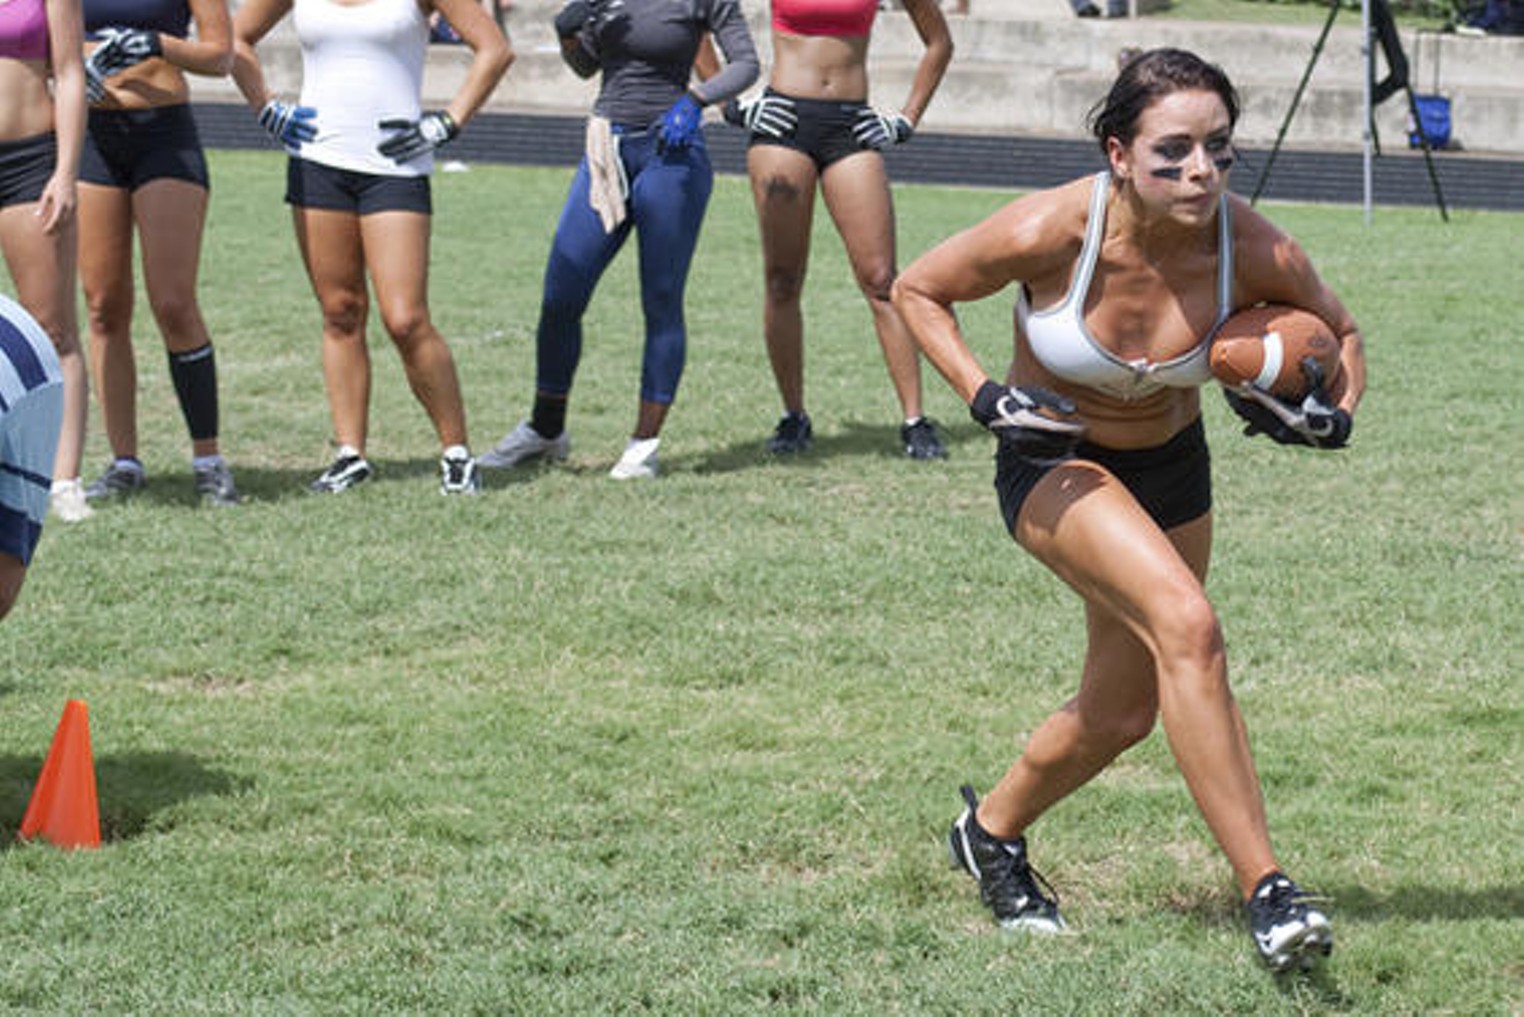 Best of Summer: Lingerie Football League in Action